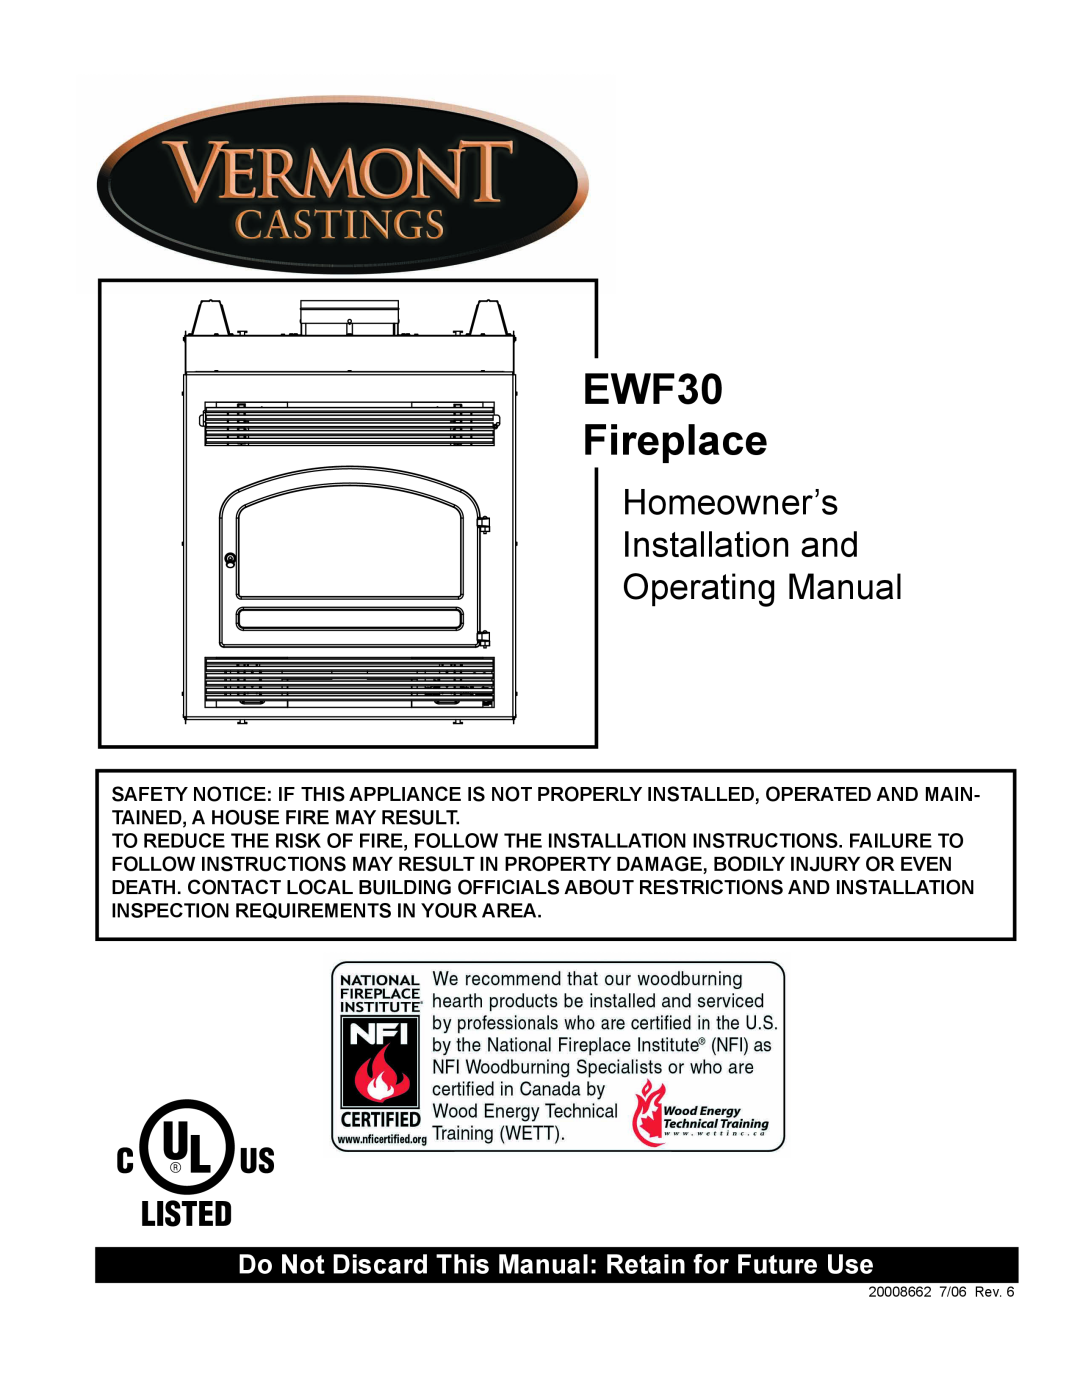 Vermont Casting installation instructions EWF30 Fireplace, CFM Specialty Home Products 